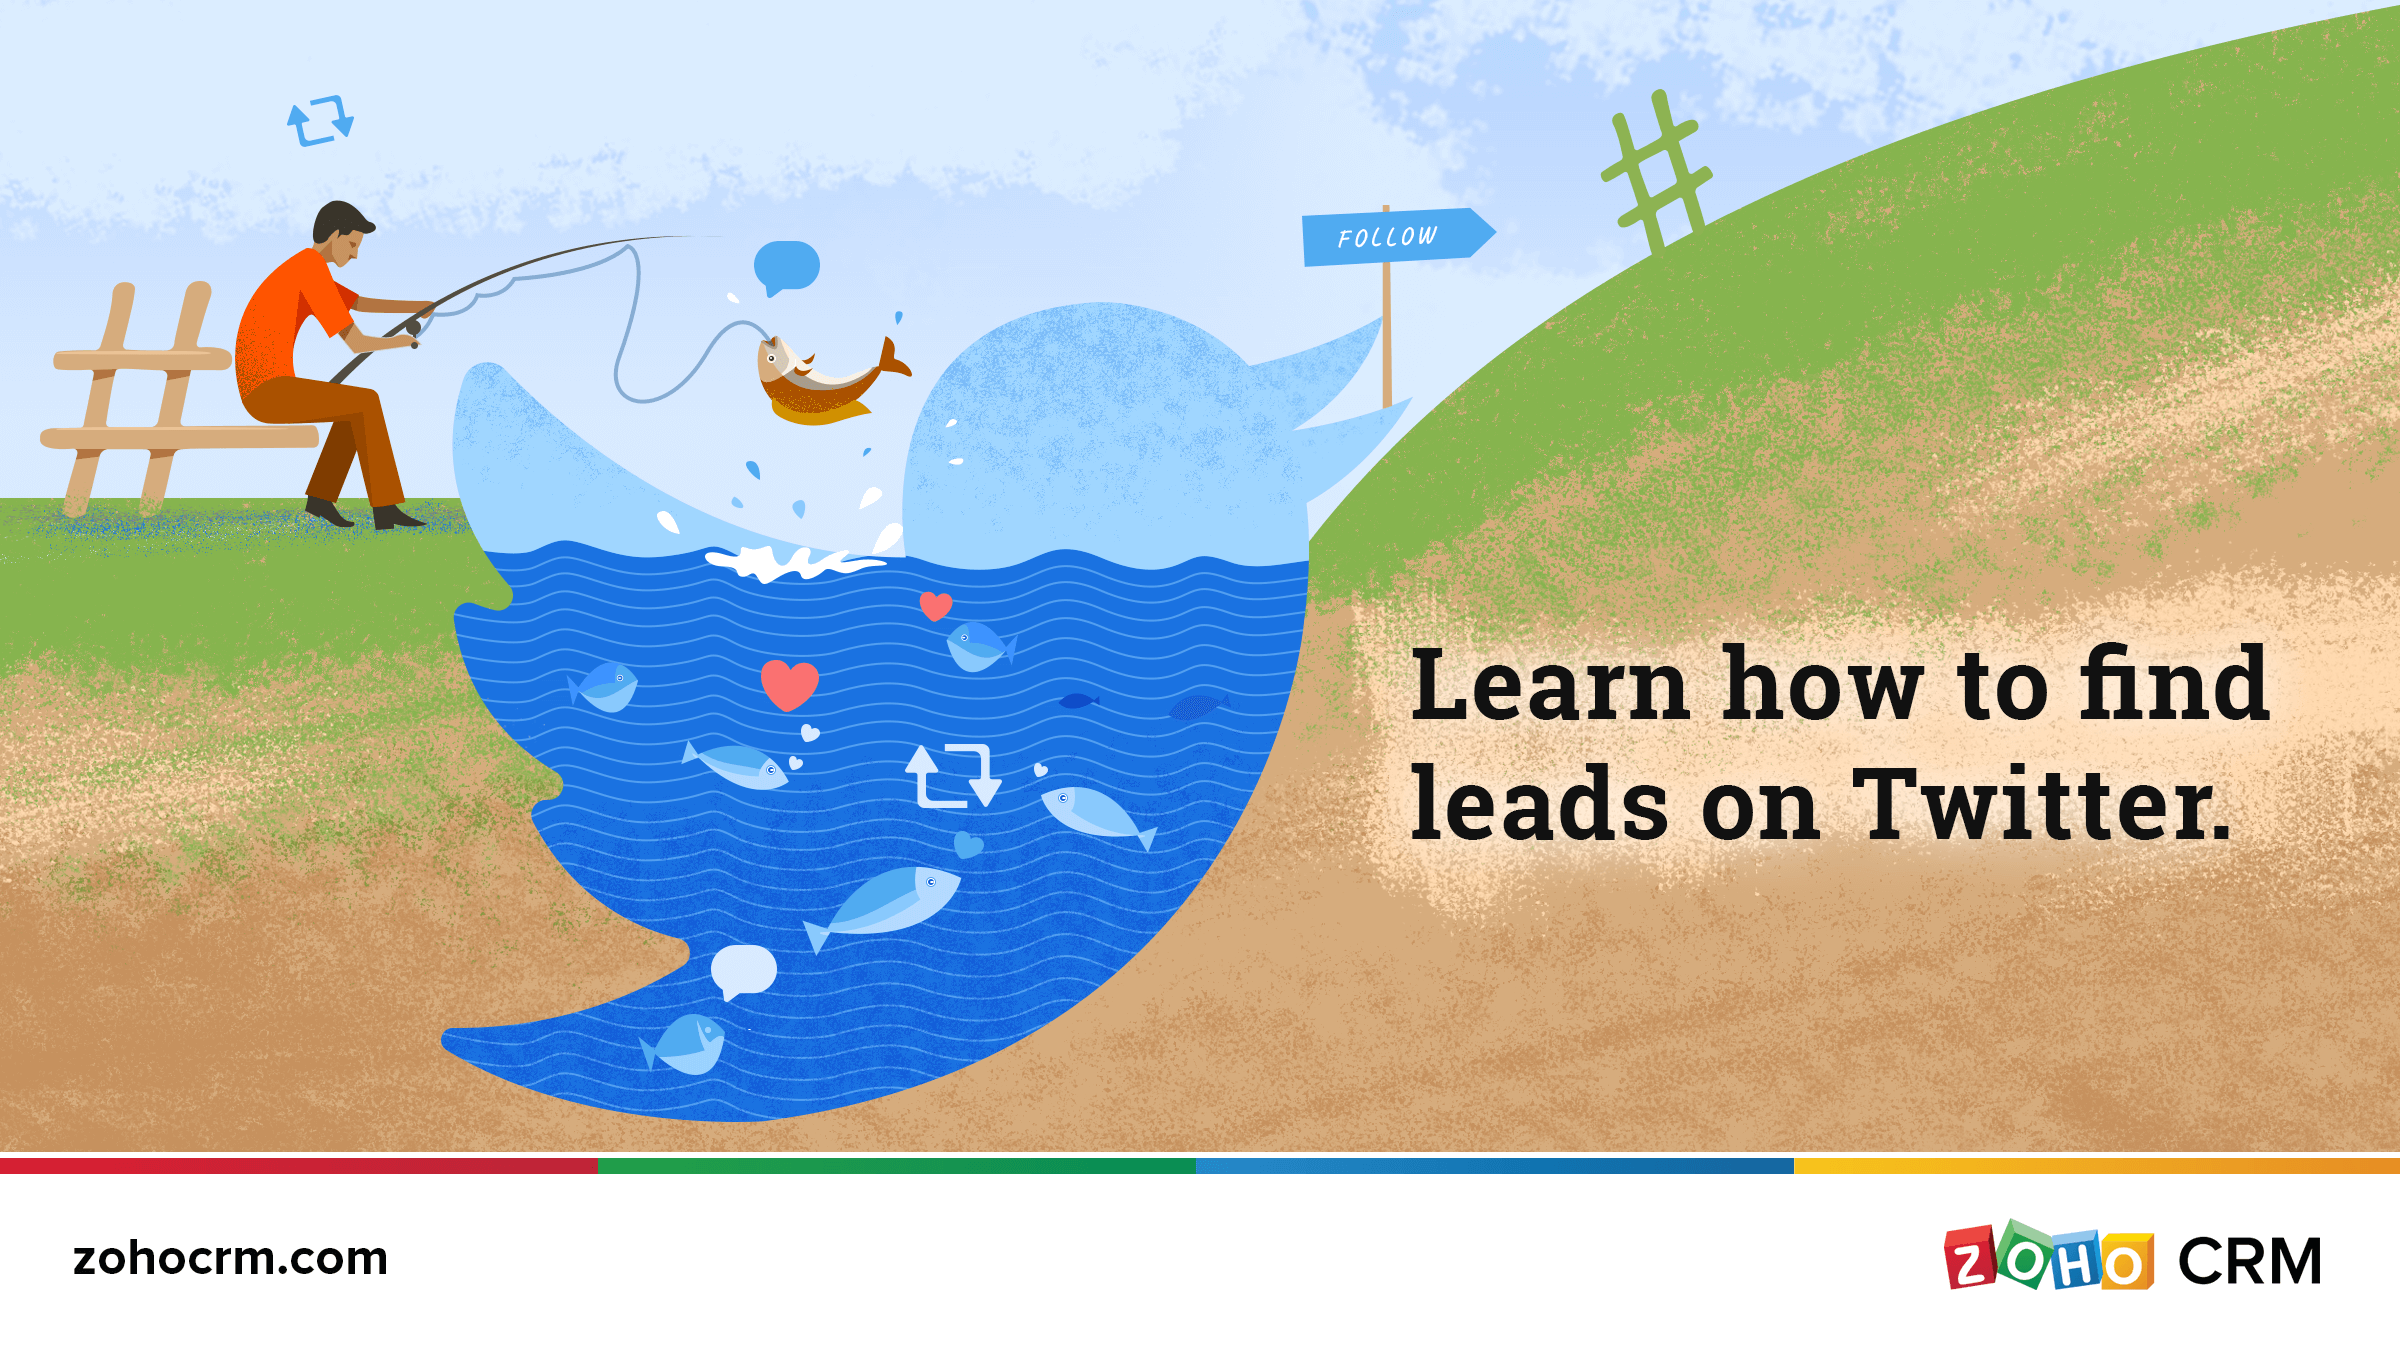 Lead Generation on Twitter - 10 Steps to Grow Your Business